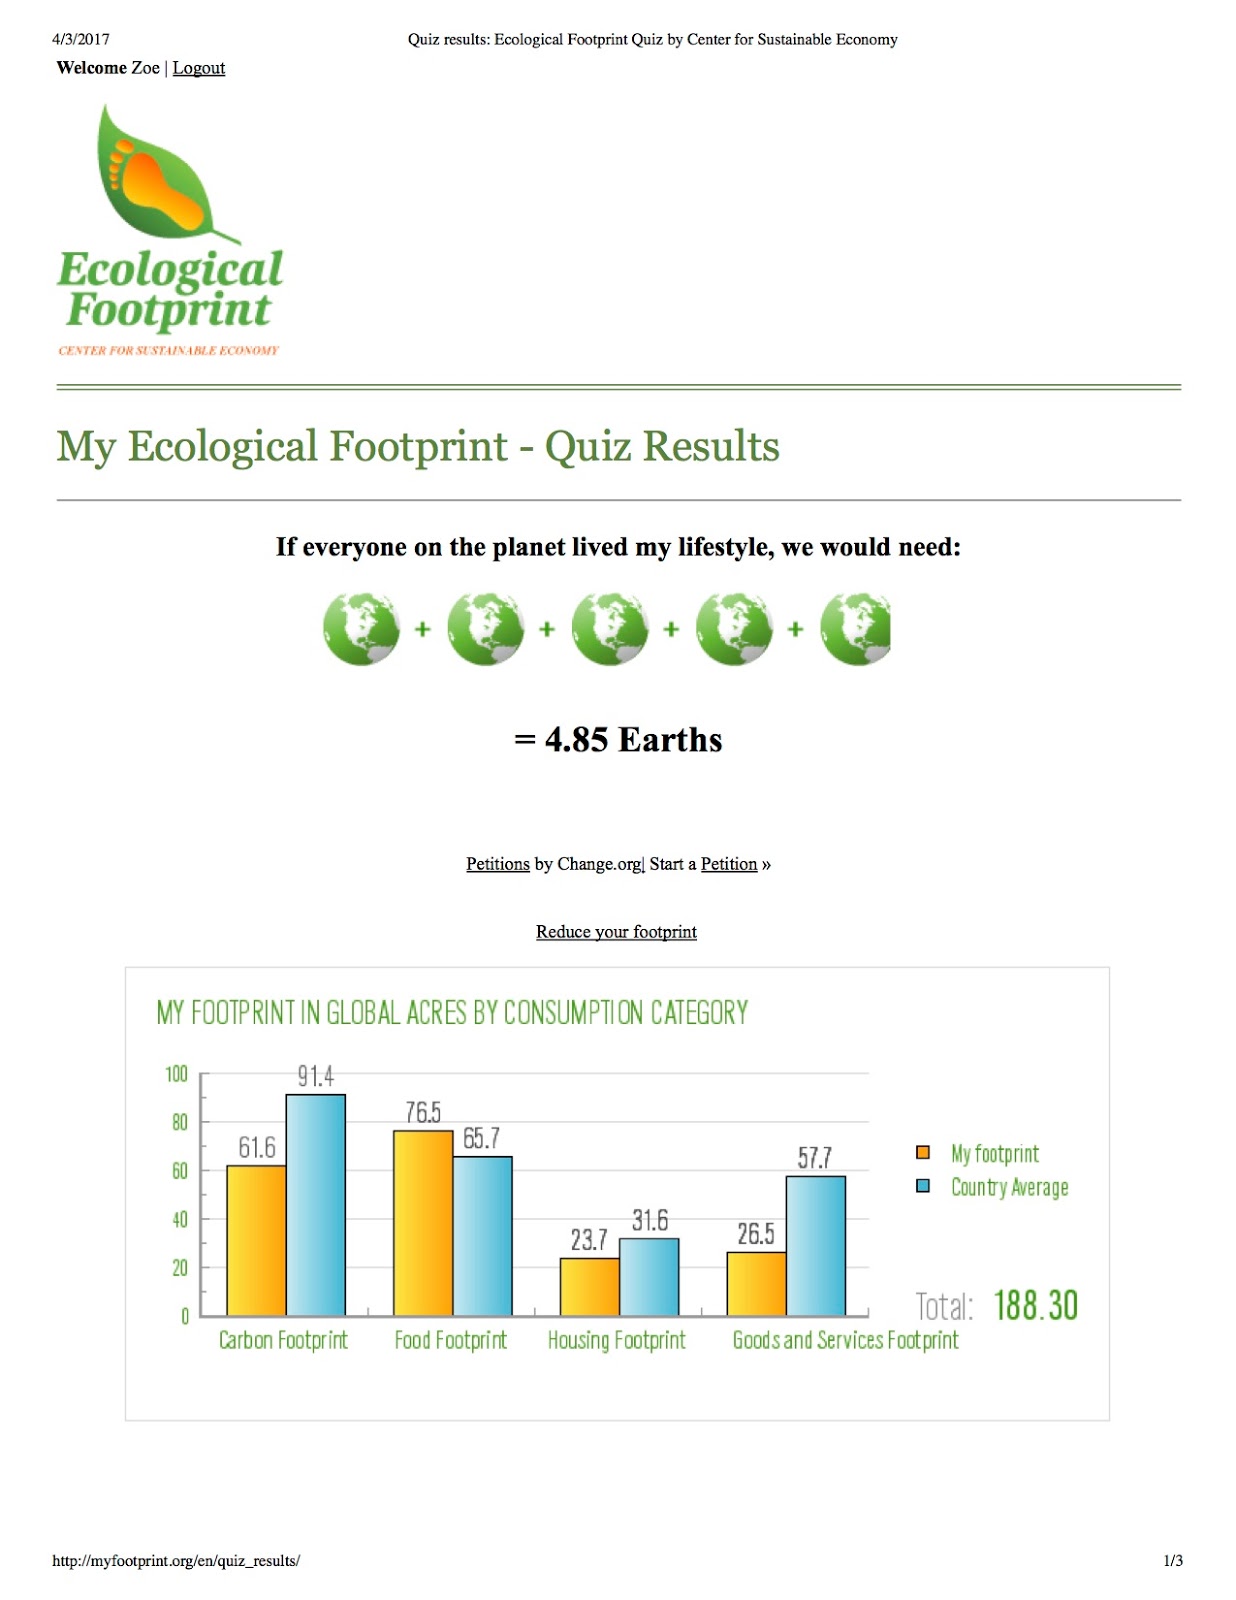 Ecological Footprint Reduction